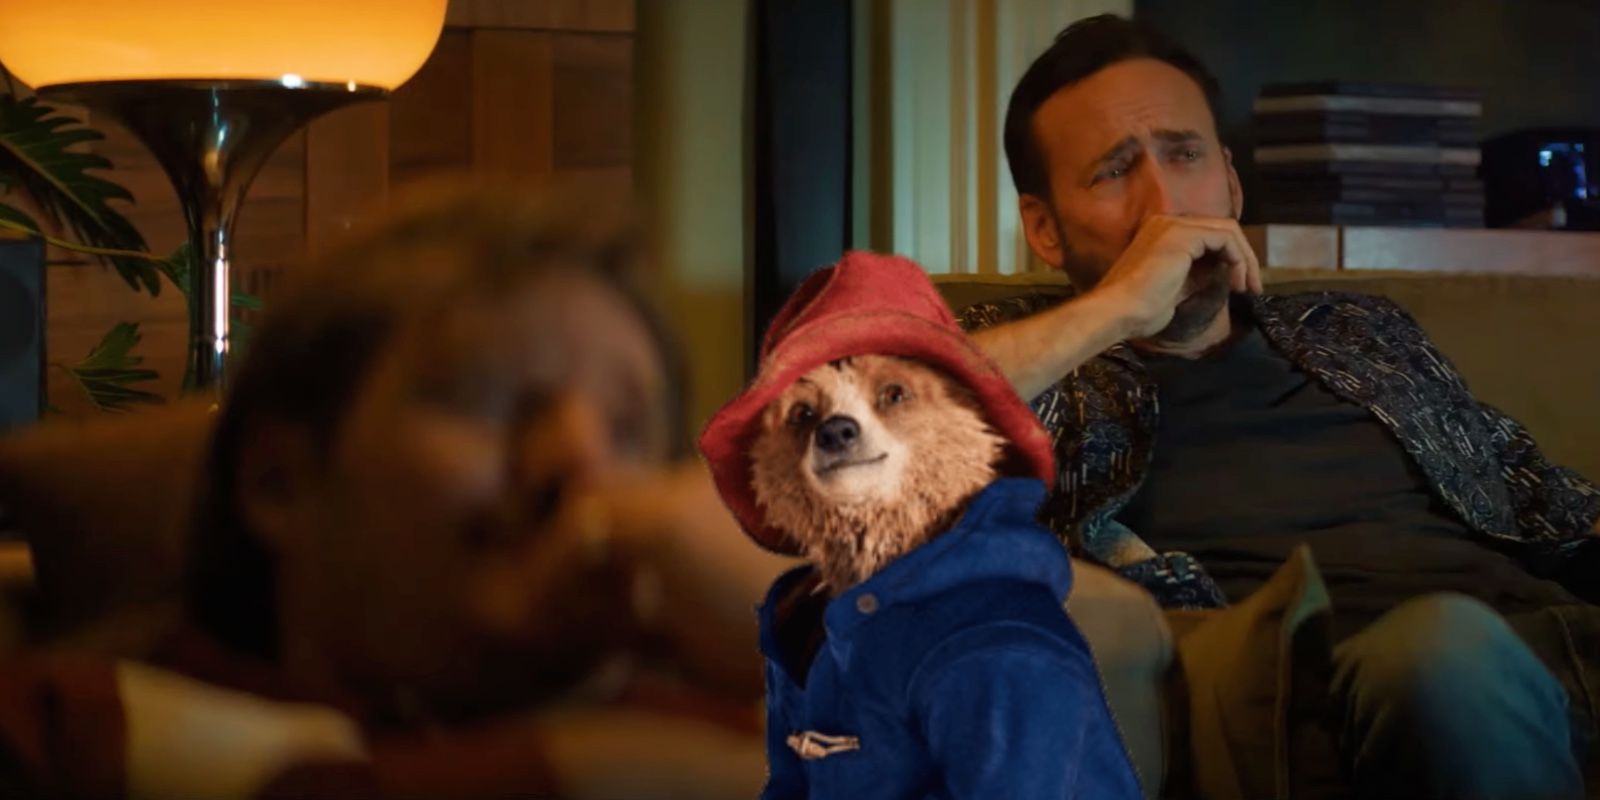 The Unbearable Weight of Massive Talent clip Nicolas Cage and Pedro Pascal with Paddington 2